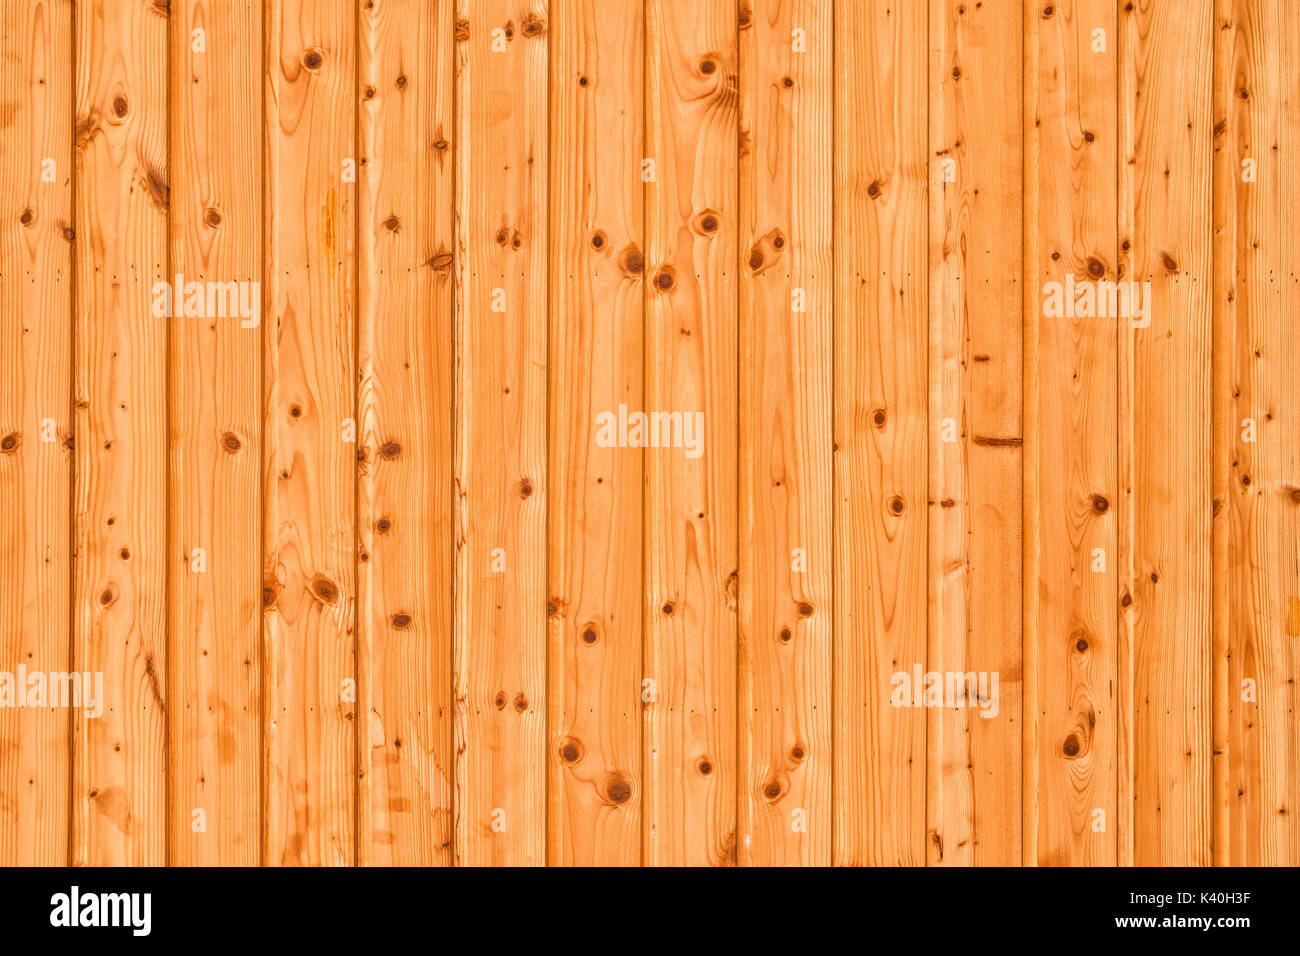 Wood texture wood background Background for Presentations Space for Text Composition art image, website, magazine or graphic for design Stock Photo